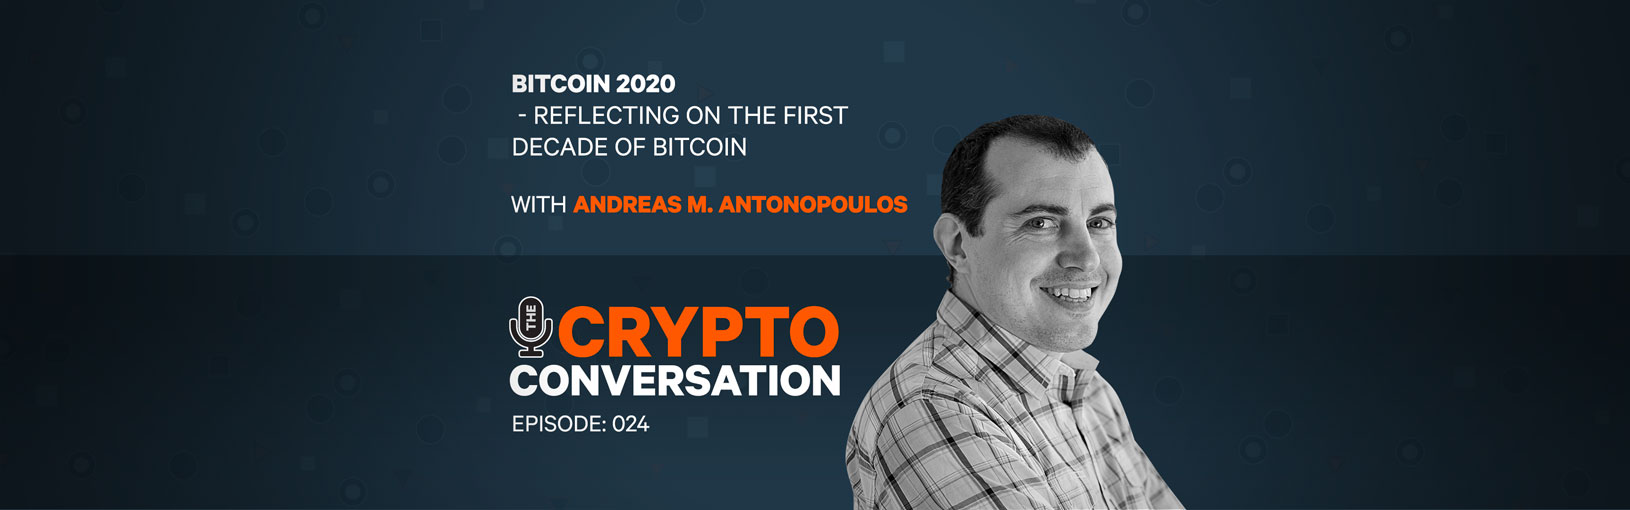 Andreas M. Antonopoulos reflects on the first decade of Bitcoin